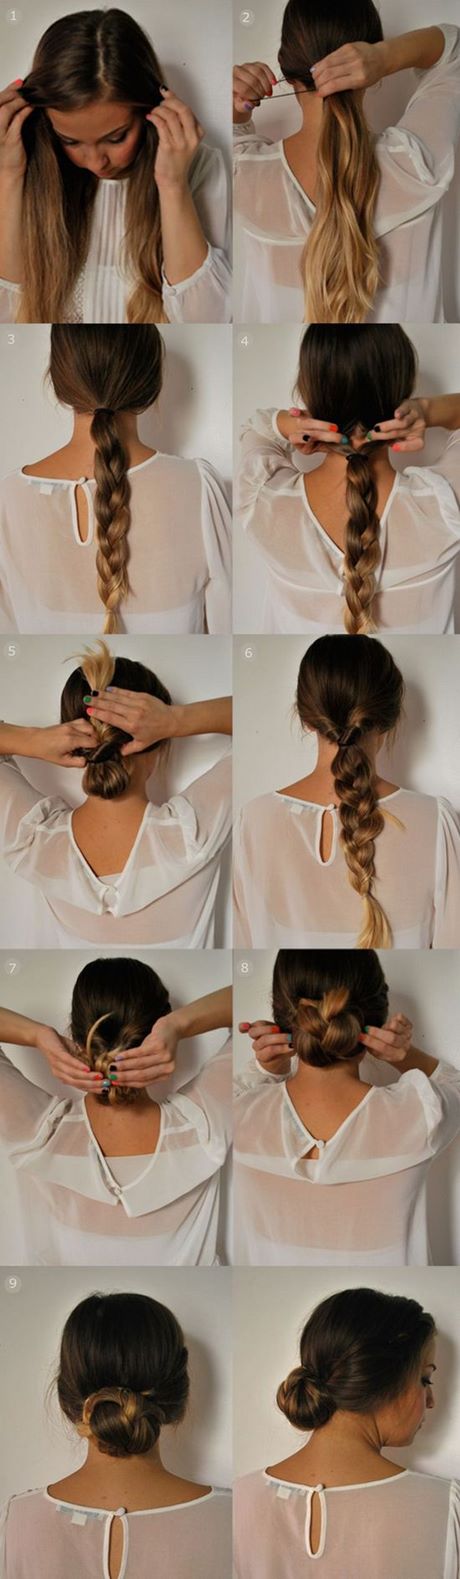 Easy ways to style long hair